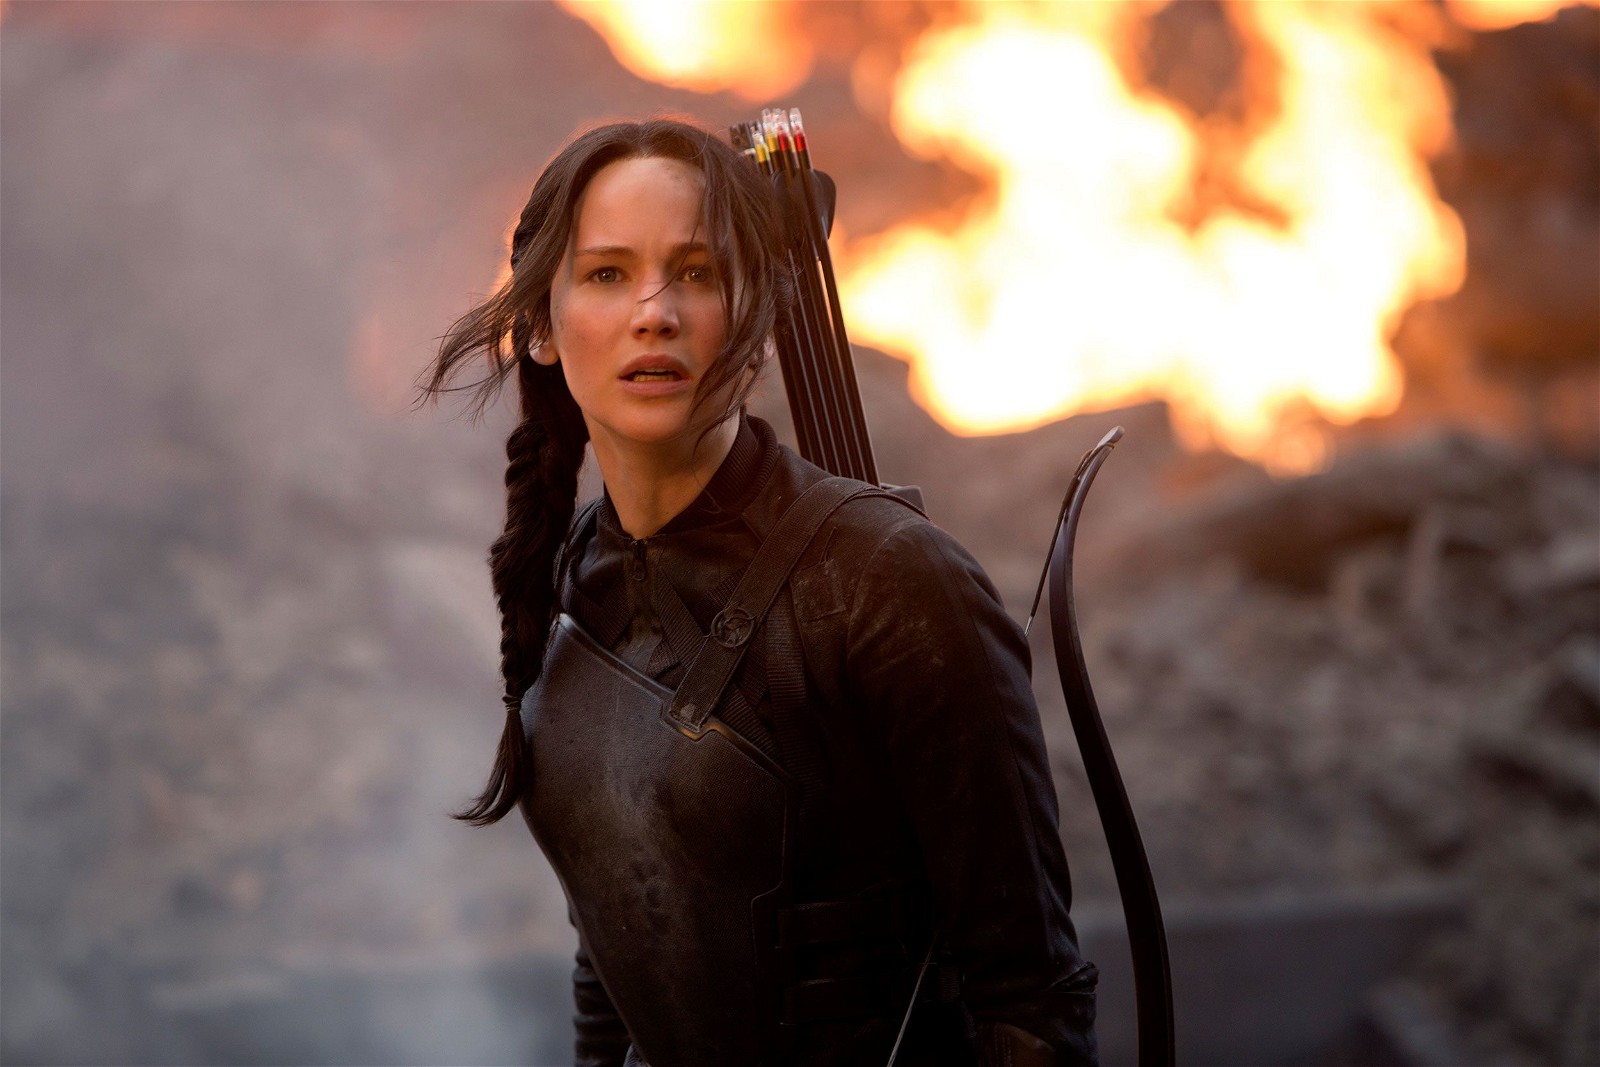 Jennifer Lawrence in a still from The Hunger Games